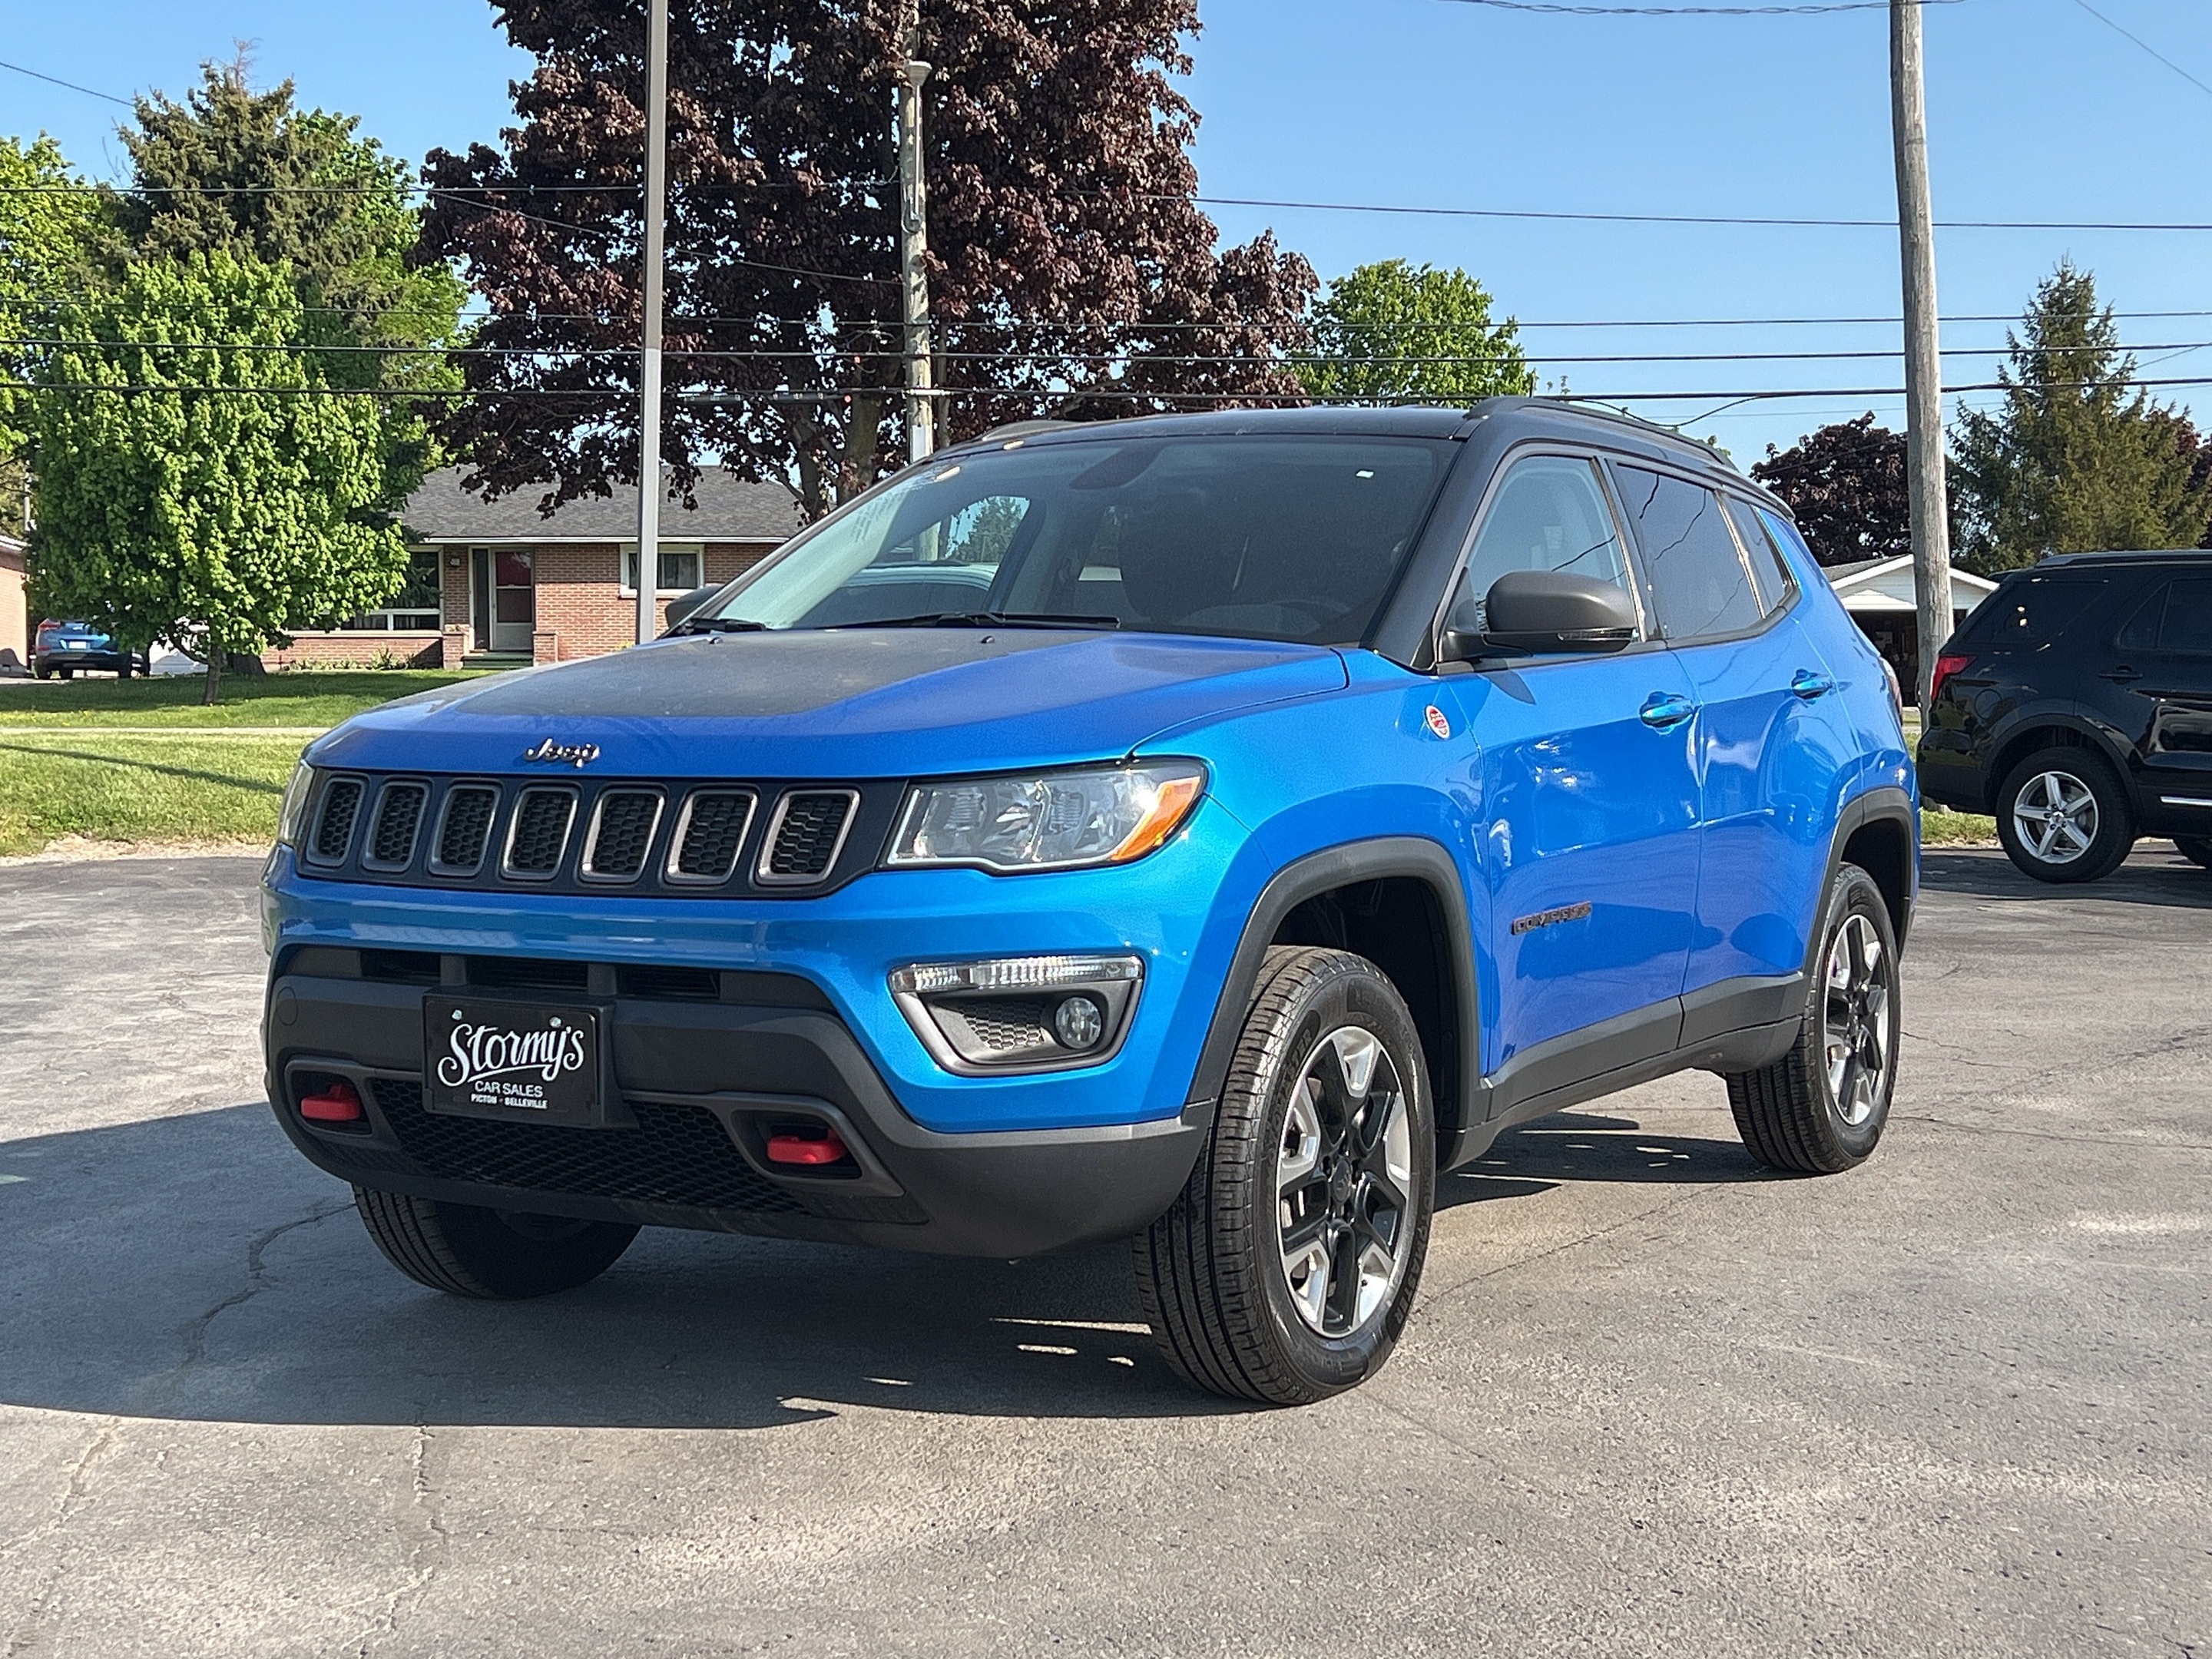 2018 Jeep Compass Trailhawk LEATHER/NAV CALL NAPANEE 613-354-2100